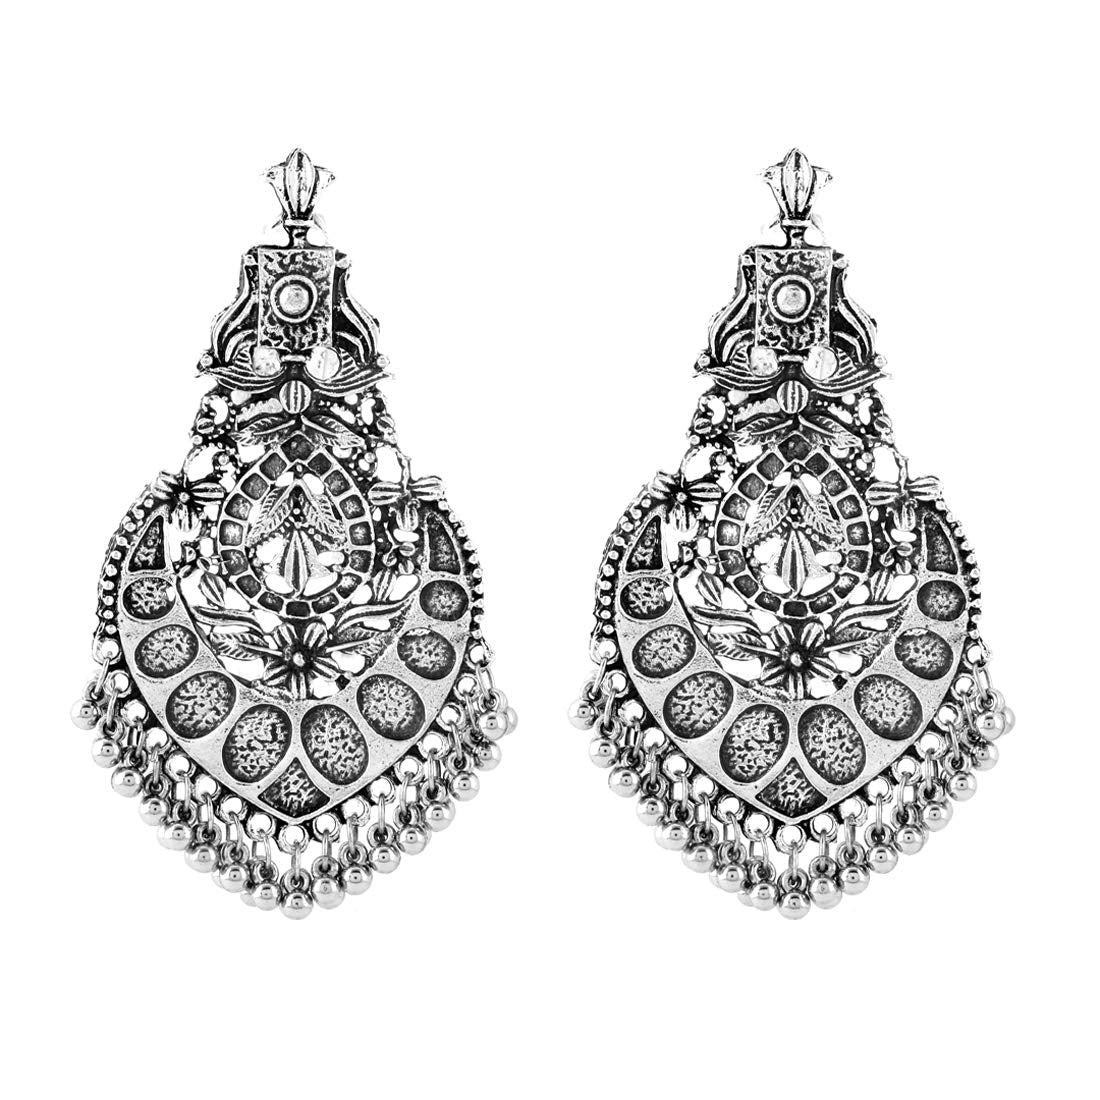 Yellow Chimes Ethnic German Silver Oxidised Flower Design Silver Beads Dangler Earrings for Women And Girls, medium (YCTJER-25OXDDNG-SL)